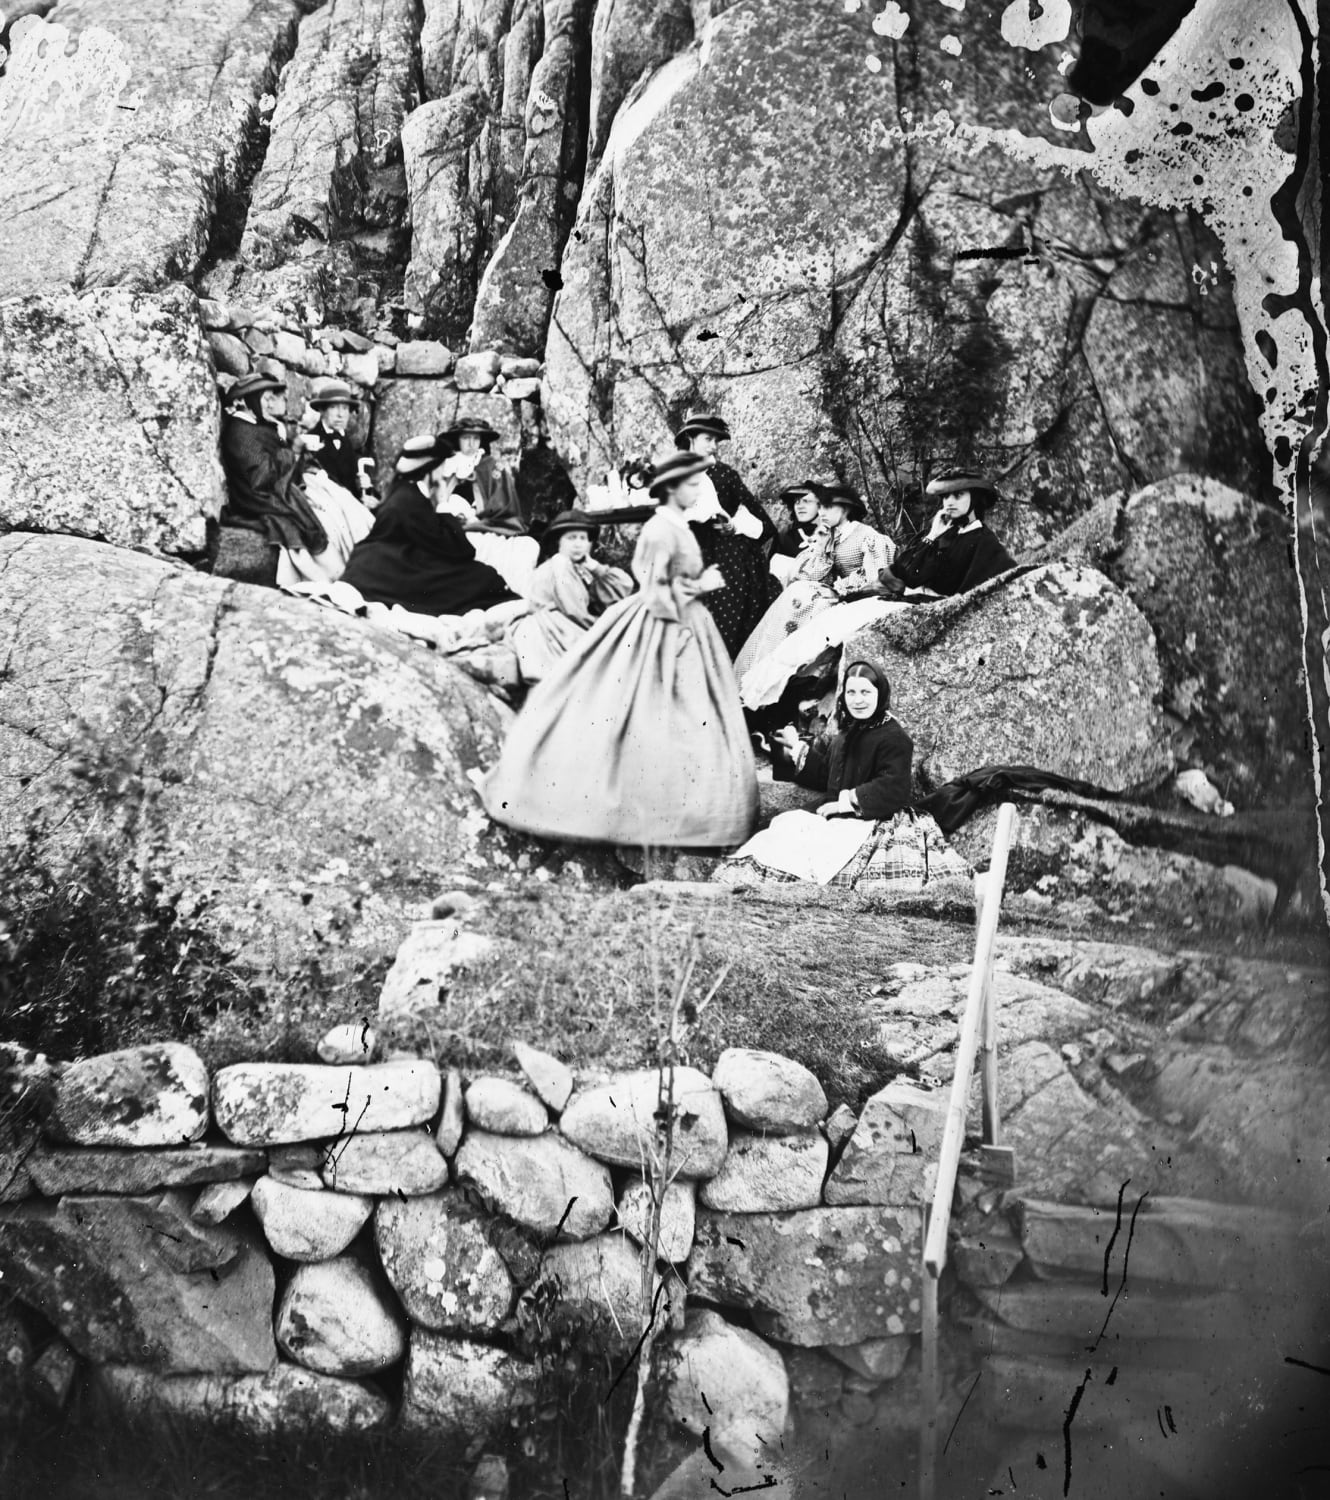 Ladies drinking coffee among the cliffs. Two of them are smiling - quite rare in photos from this time. Lysekil, Sweden in the 1860's.